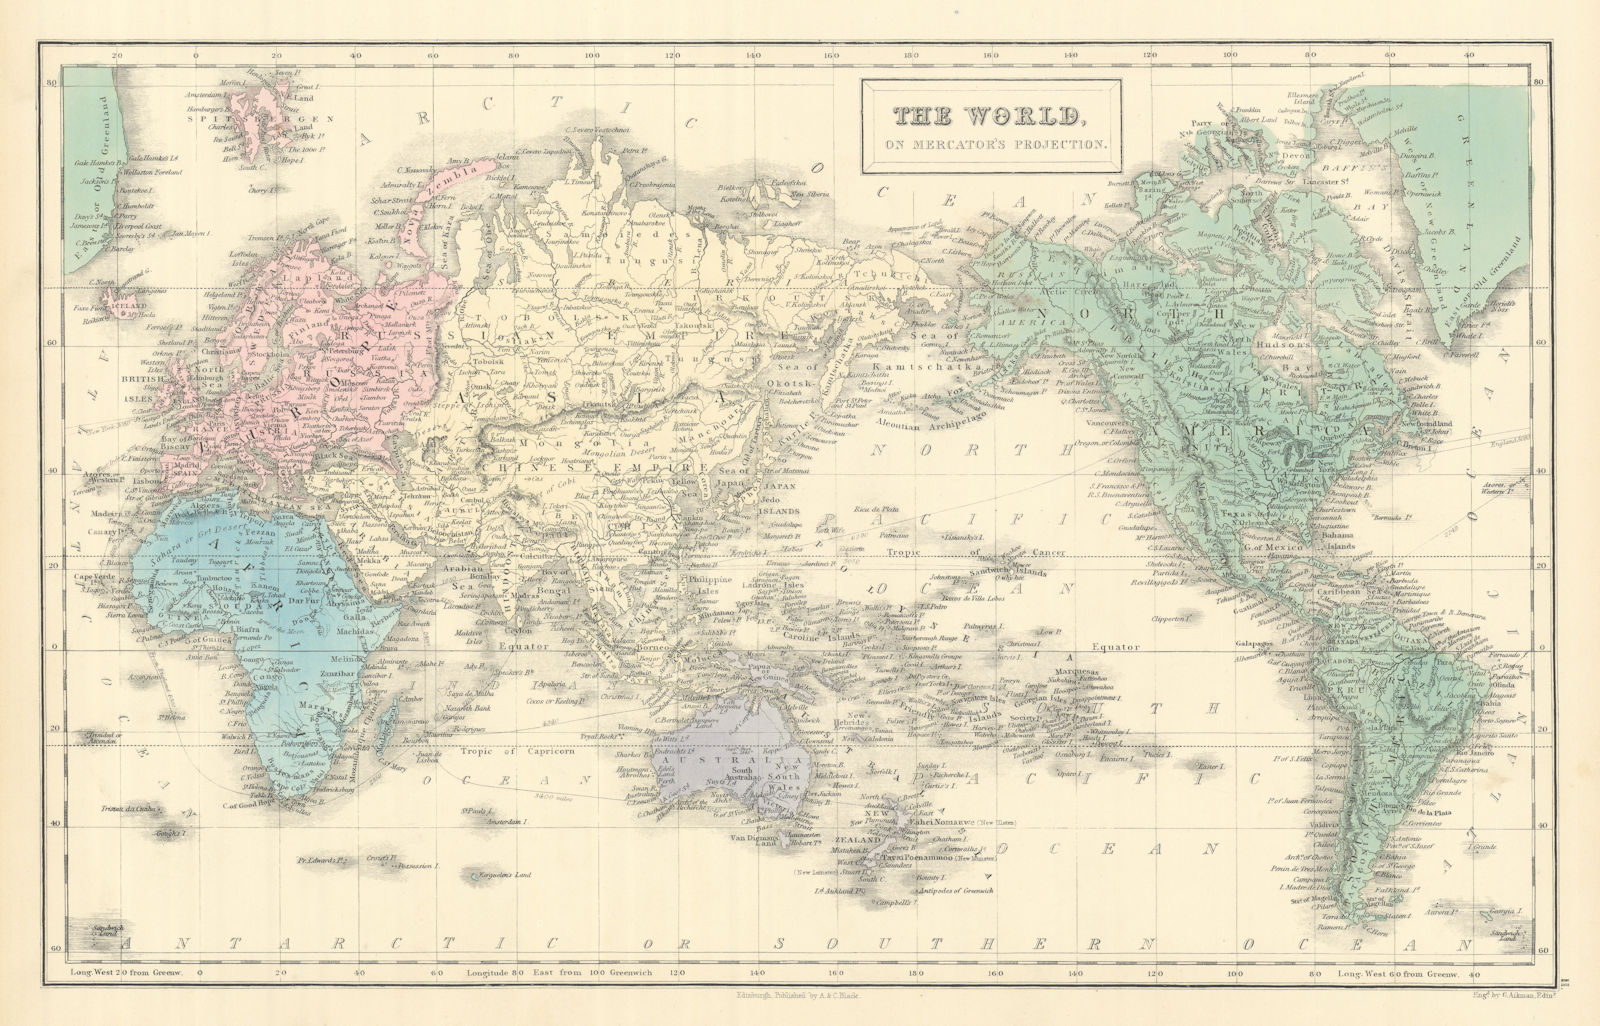 Associate Product The World, on Mercator's projection by GEORGE AIKMAN. Asia-centric 1854 map